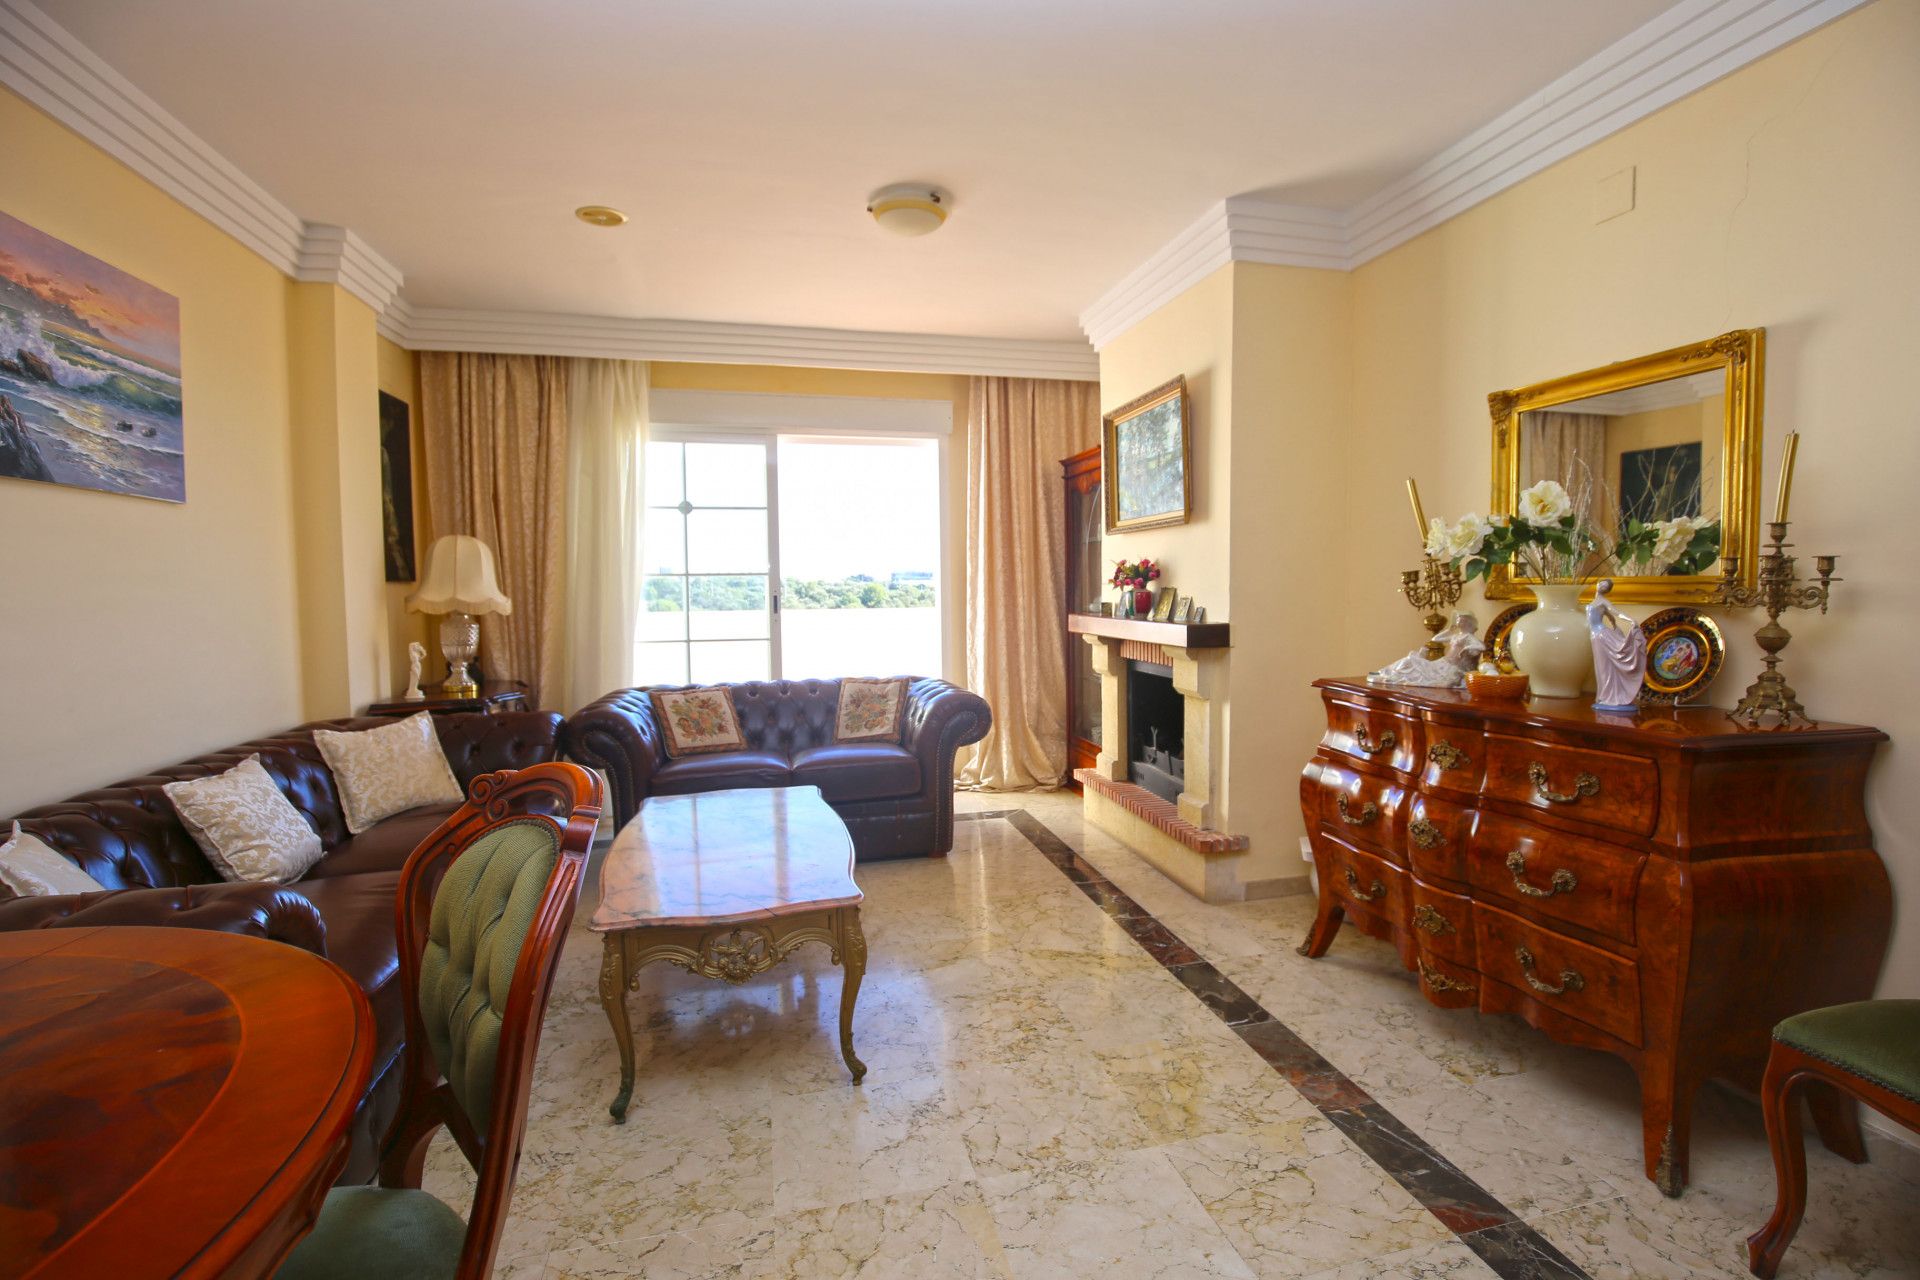 Charming one bedroom, southeast facing apartment in the gated community of Río Real